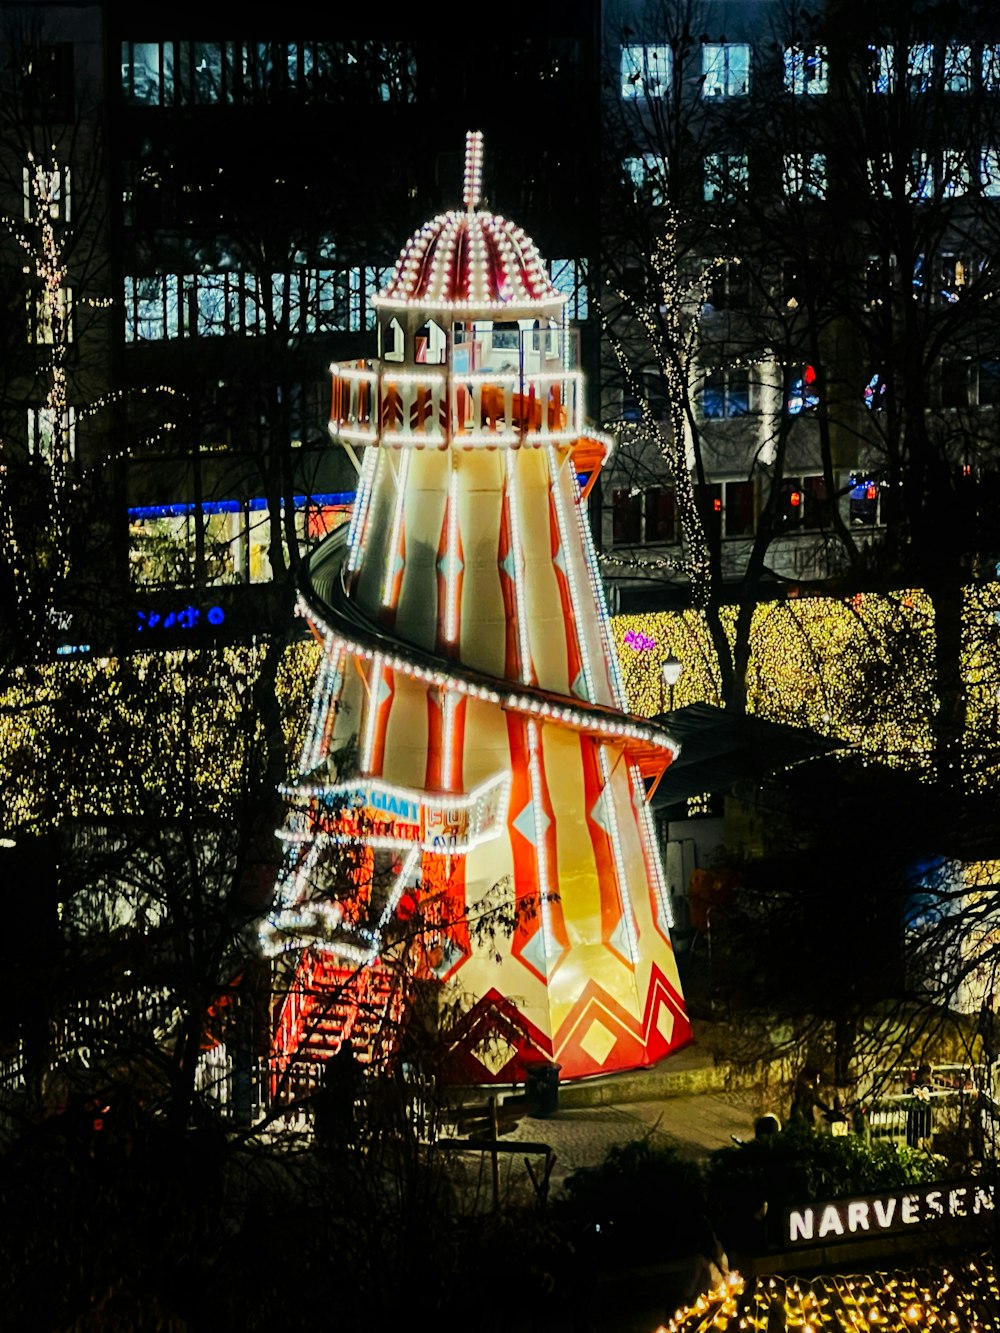 a carnival ride lit up at night in a park